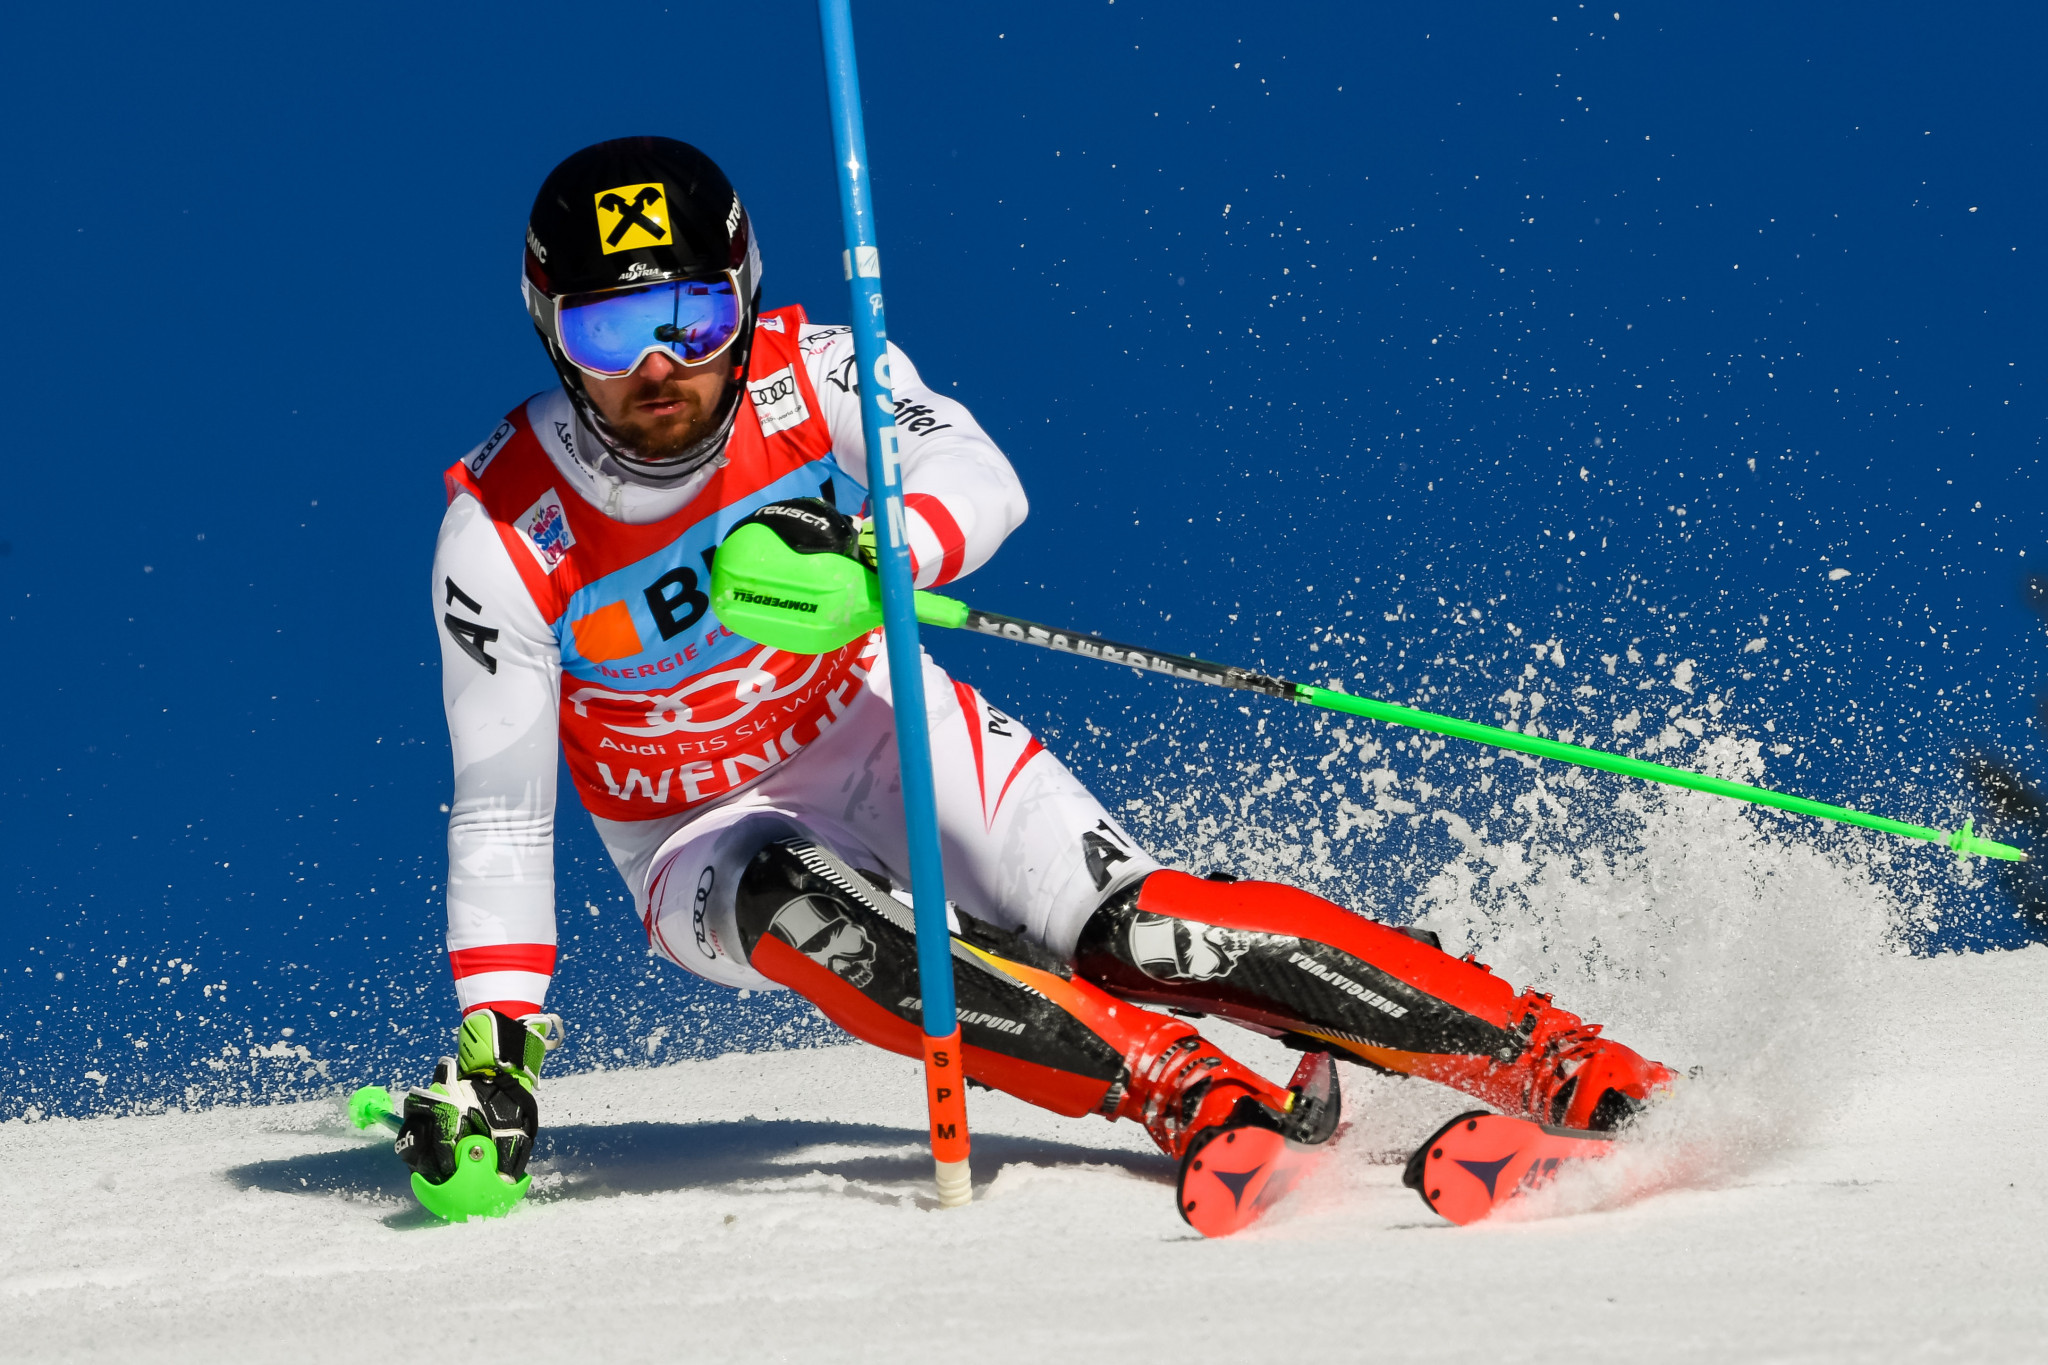 Austria's Marcel Hirscher stretched his consecutive slalom winning streak to five ©Getty Images